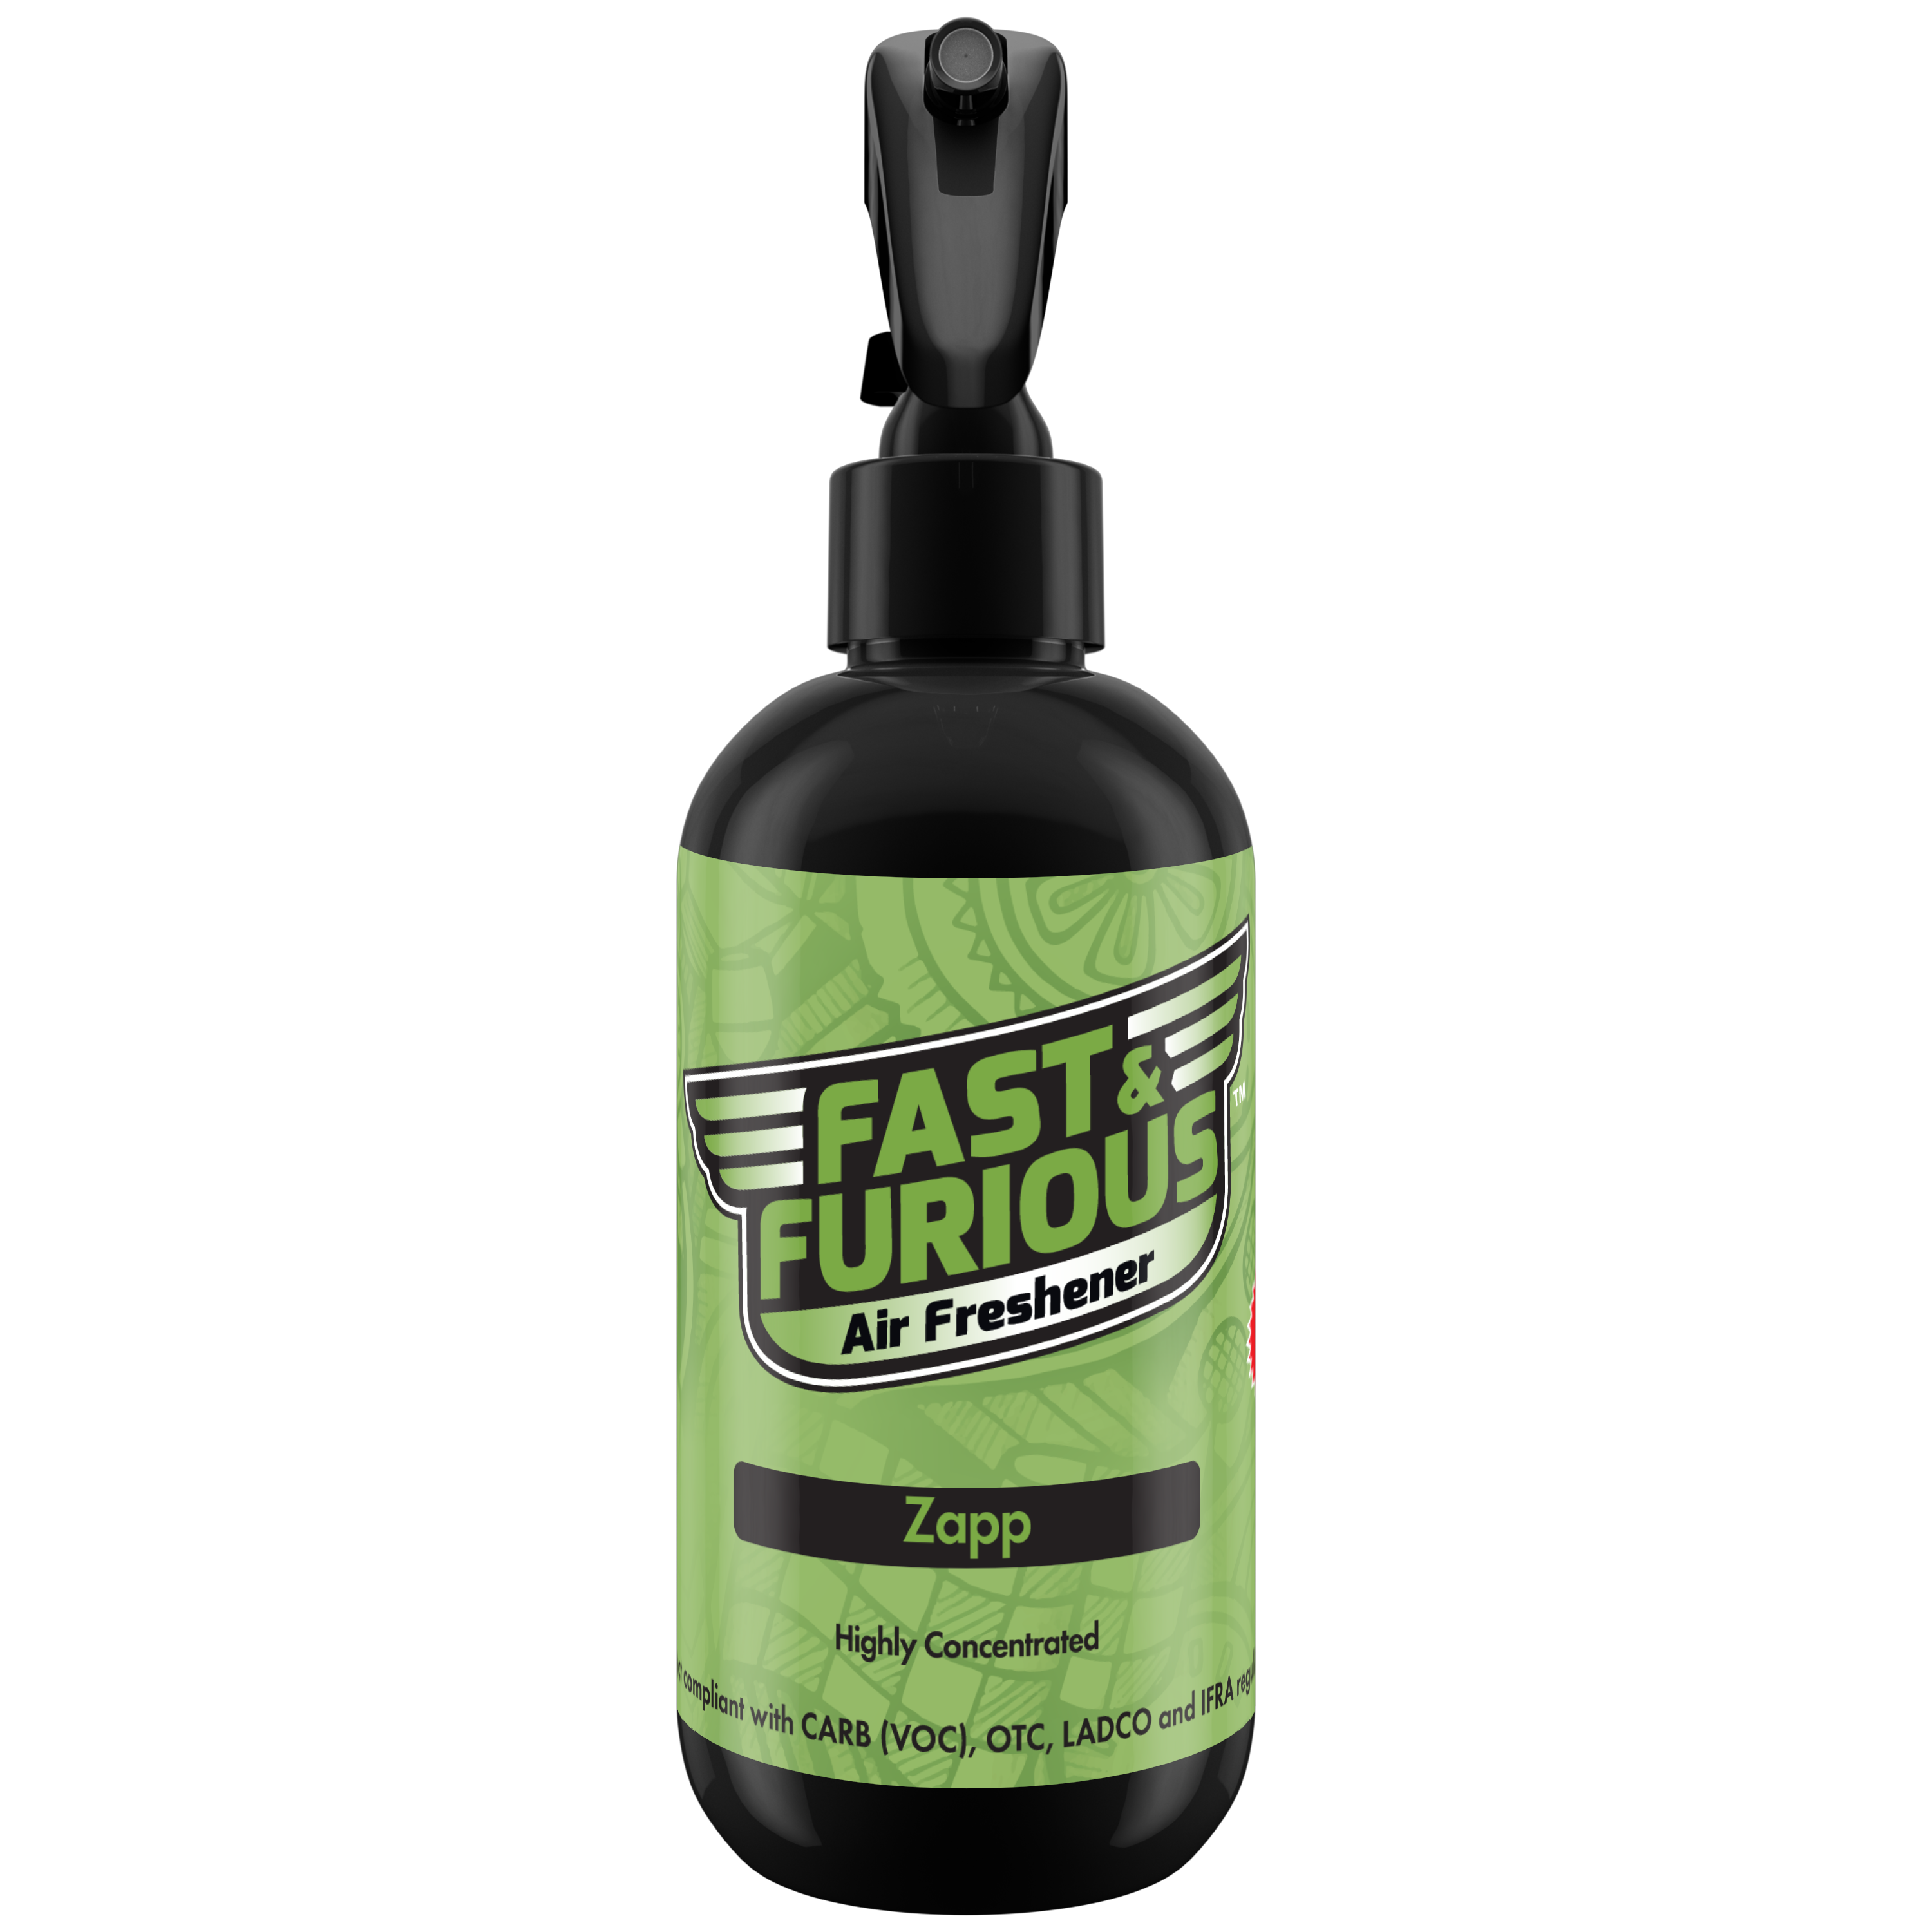 Fast and Furious Air Freshener - Zapp Scent Size: 8oz